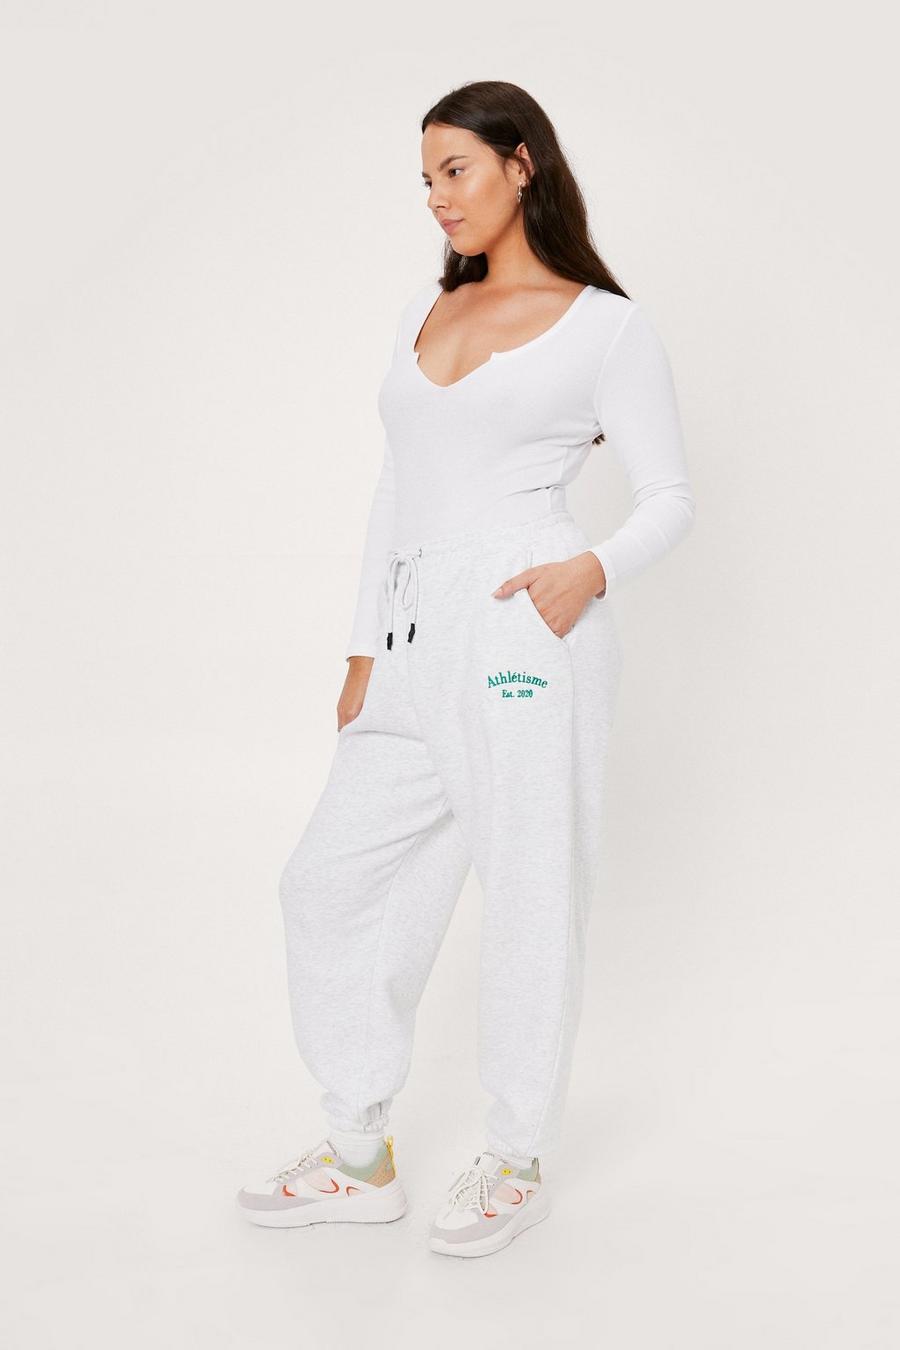 Plus Size Athletisme Relaxed Joggers